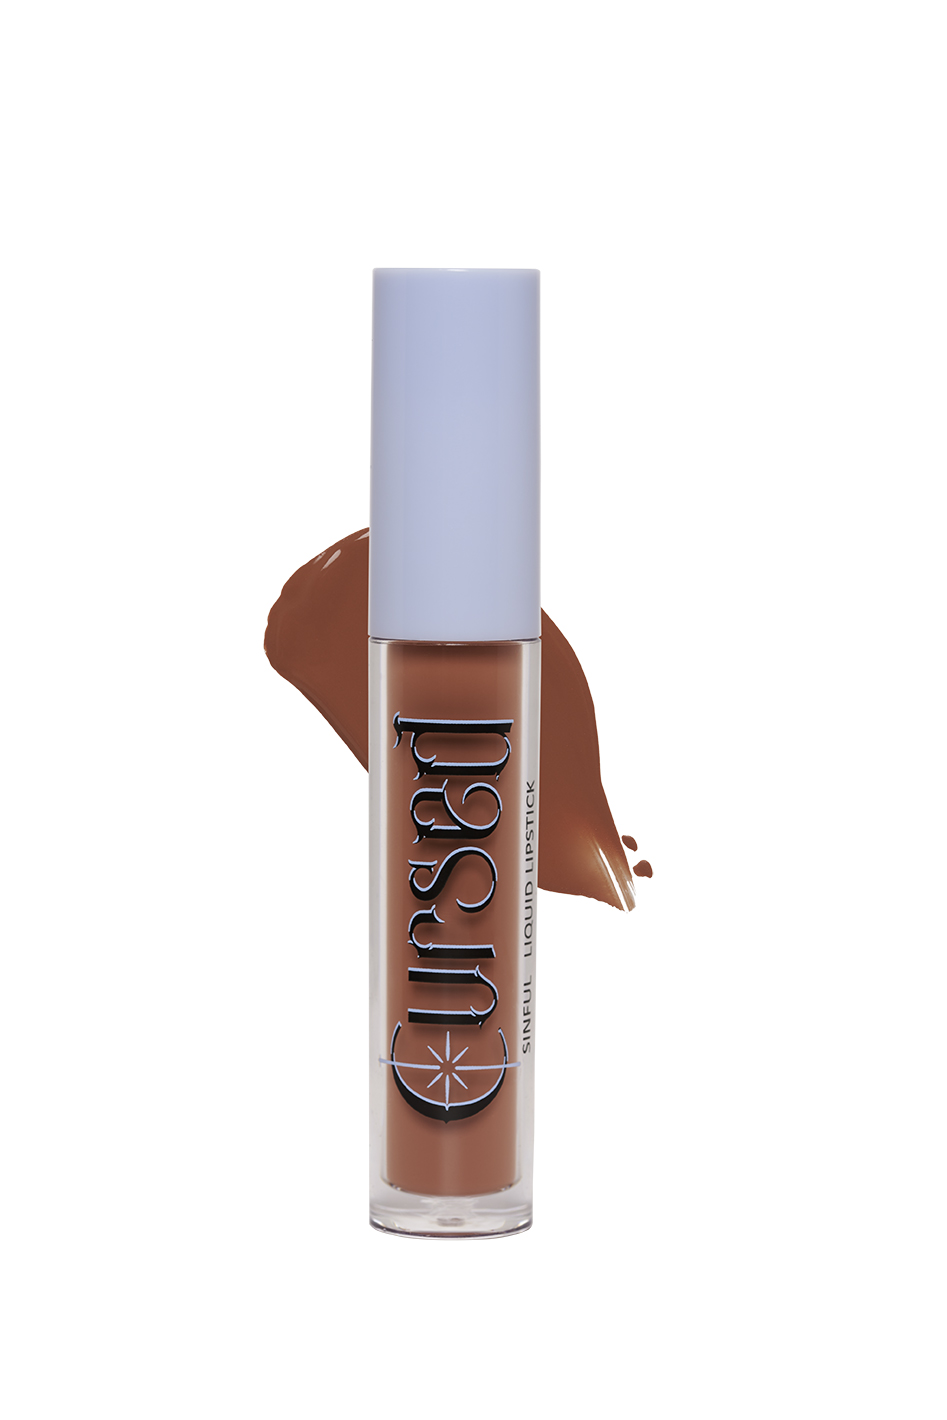 A Packshot with Swatch from the Gloss from Cursed Cosmetics. Photographed by Studio Taupe